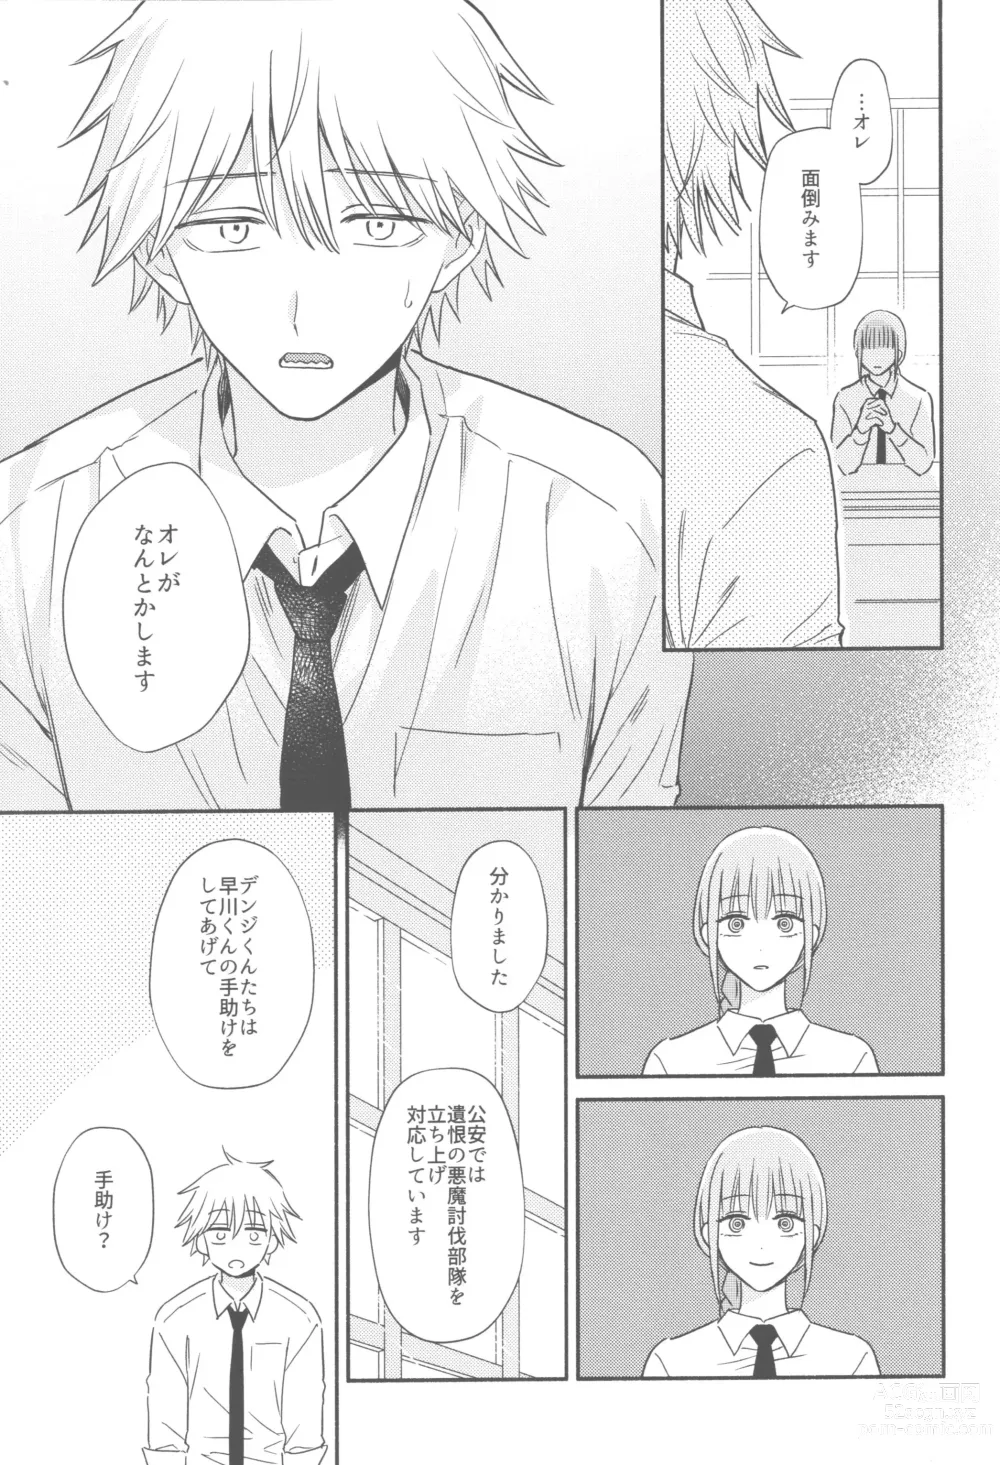 Page 6 of doujinshi Shelter